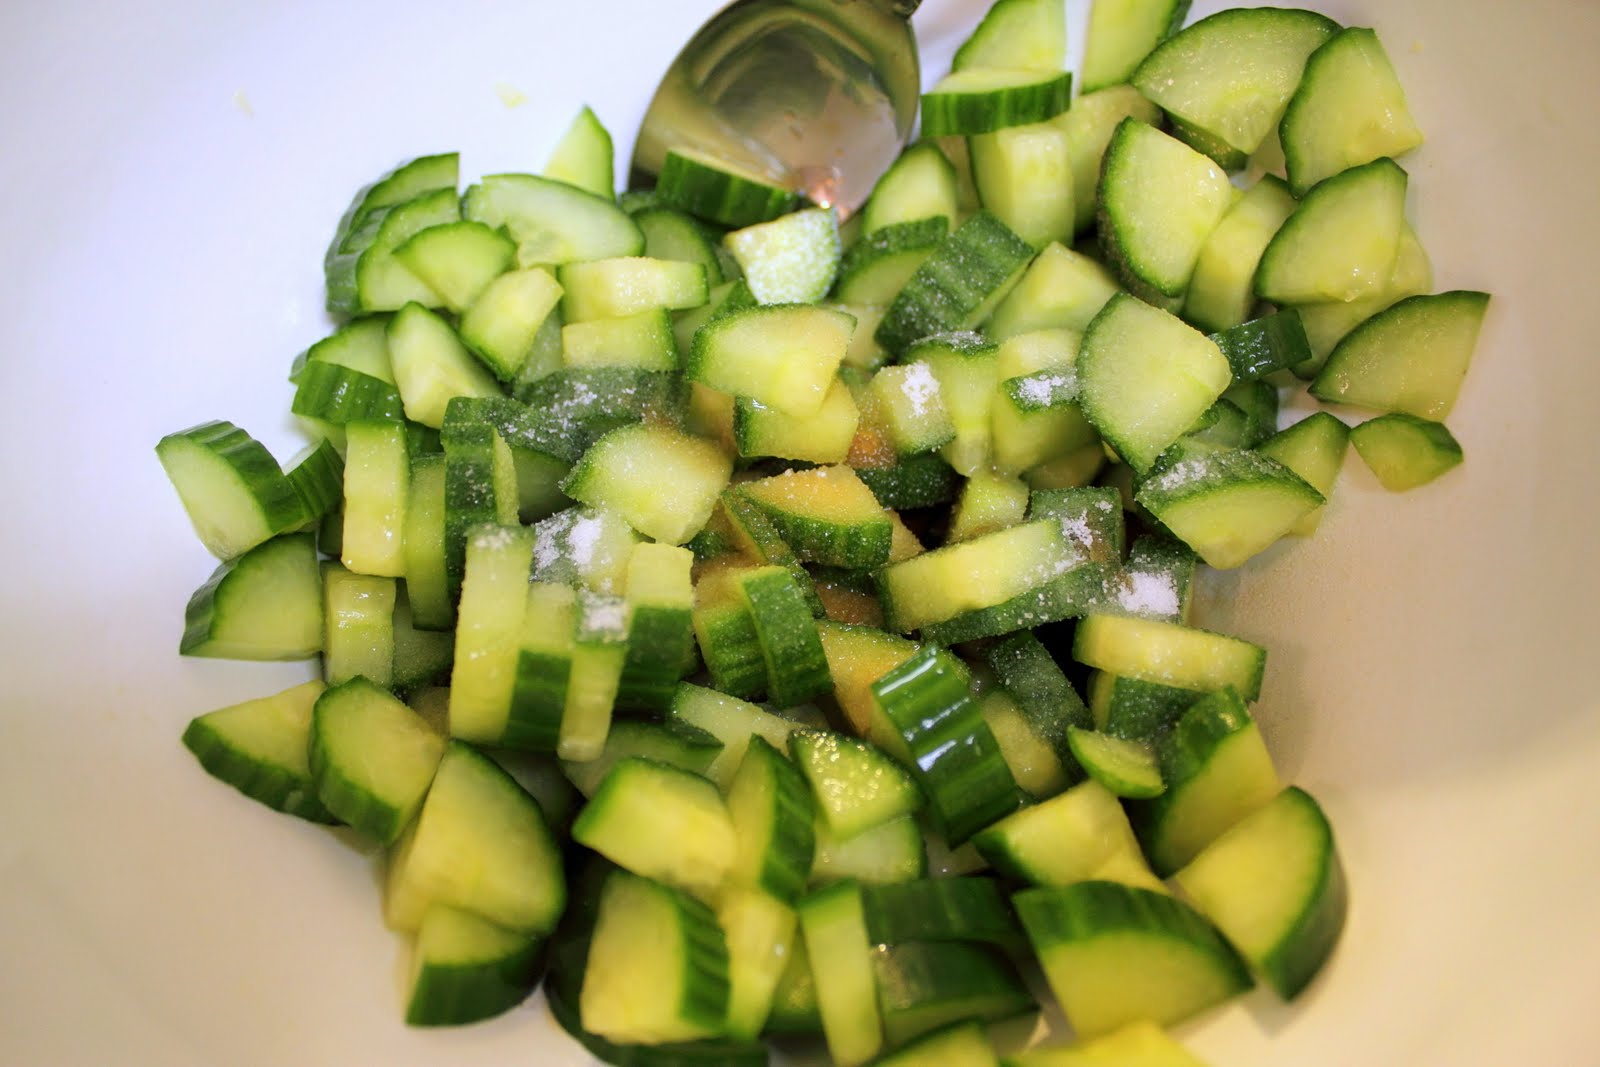 Hungry Students Food and Travels: Chinese Cucumber Salad